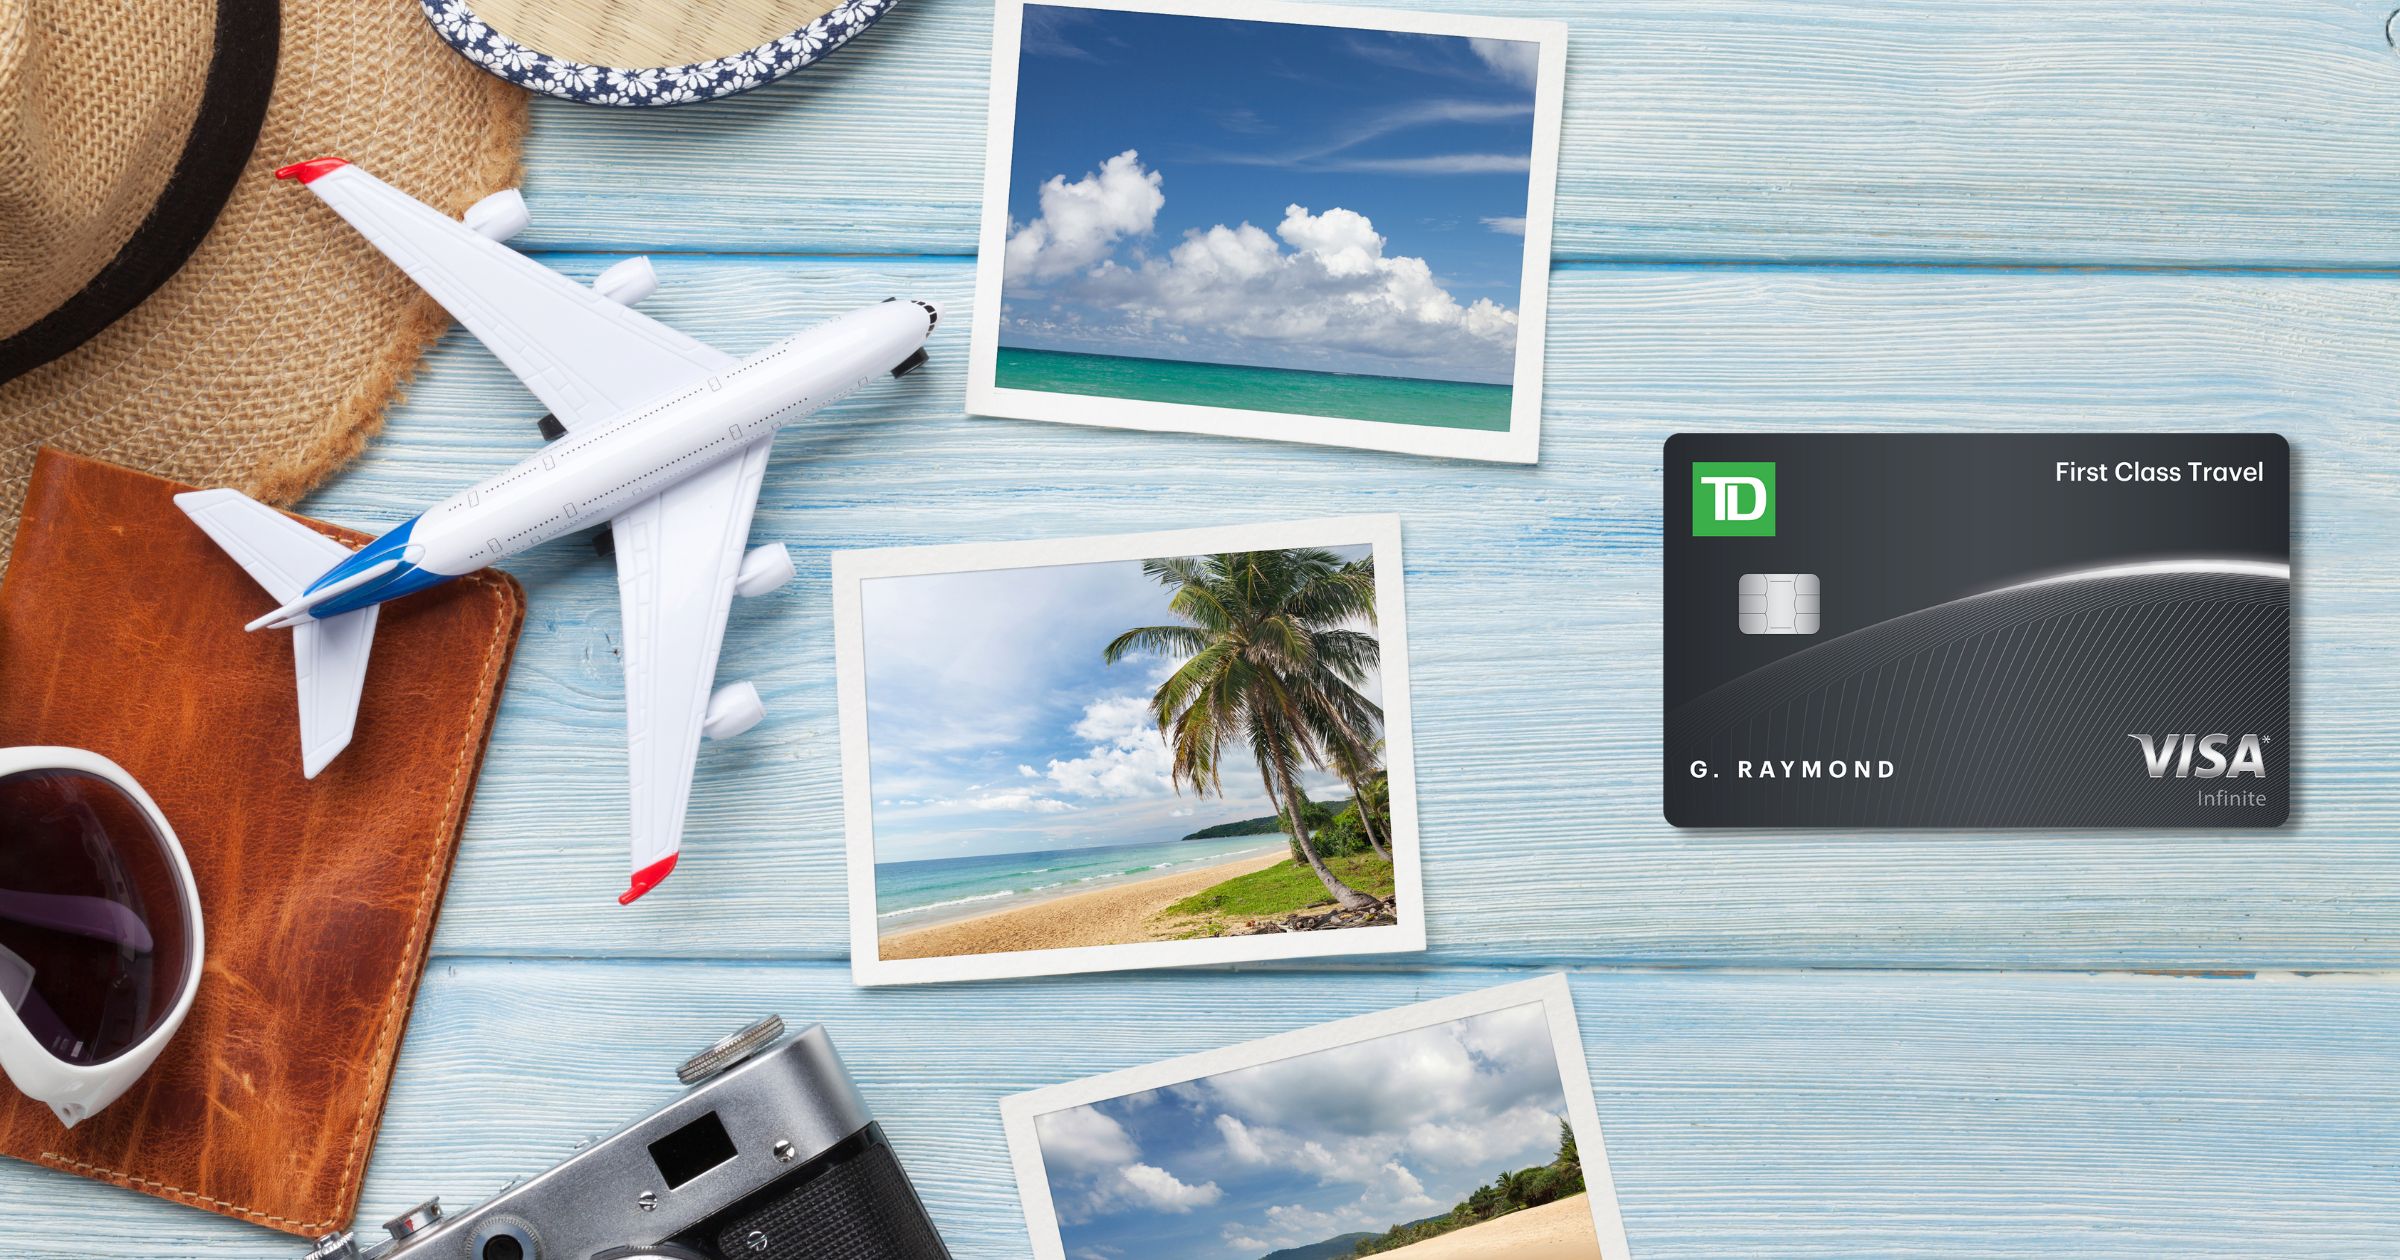 td first class travel points calculator